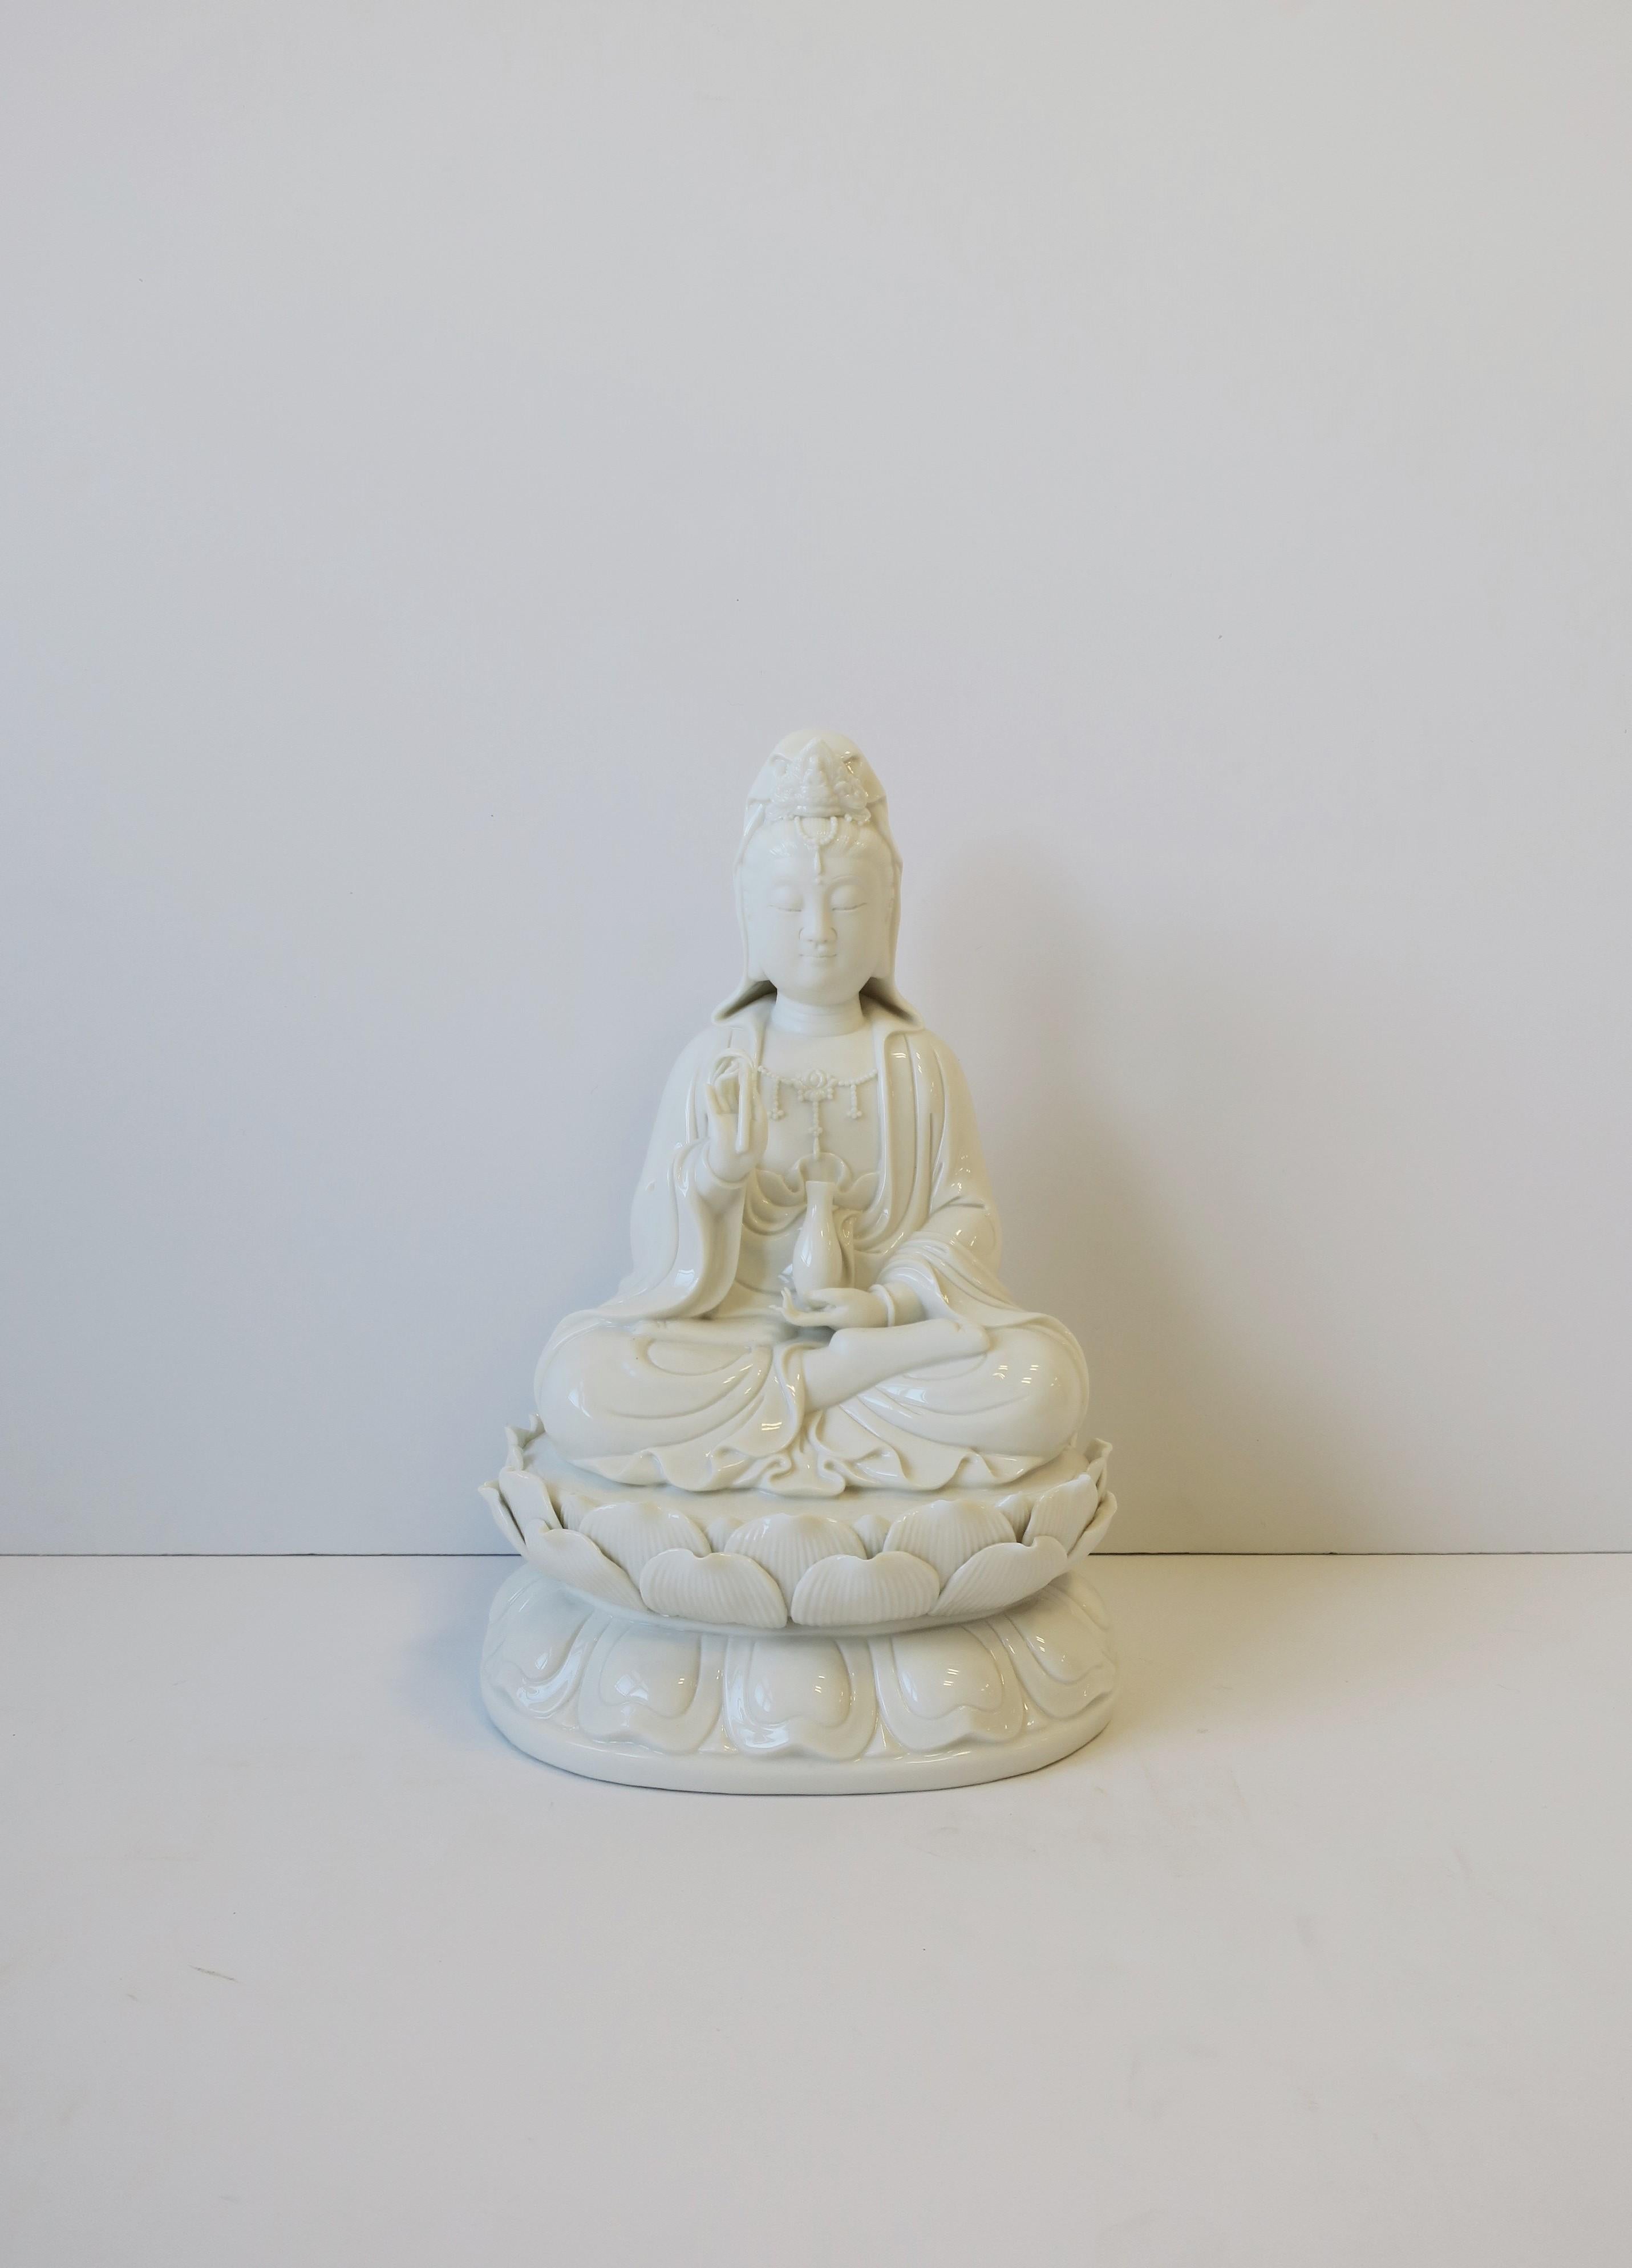 A white porcelain Buddha, circa late-20th century, Asia. Buddha, relatively large, sitting in meditating position with lotus leaves surrounding base. There are several special characteristics of a Buddha; specific to this Buddha they include a